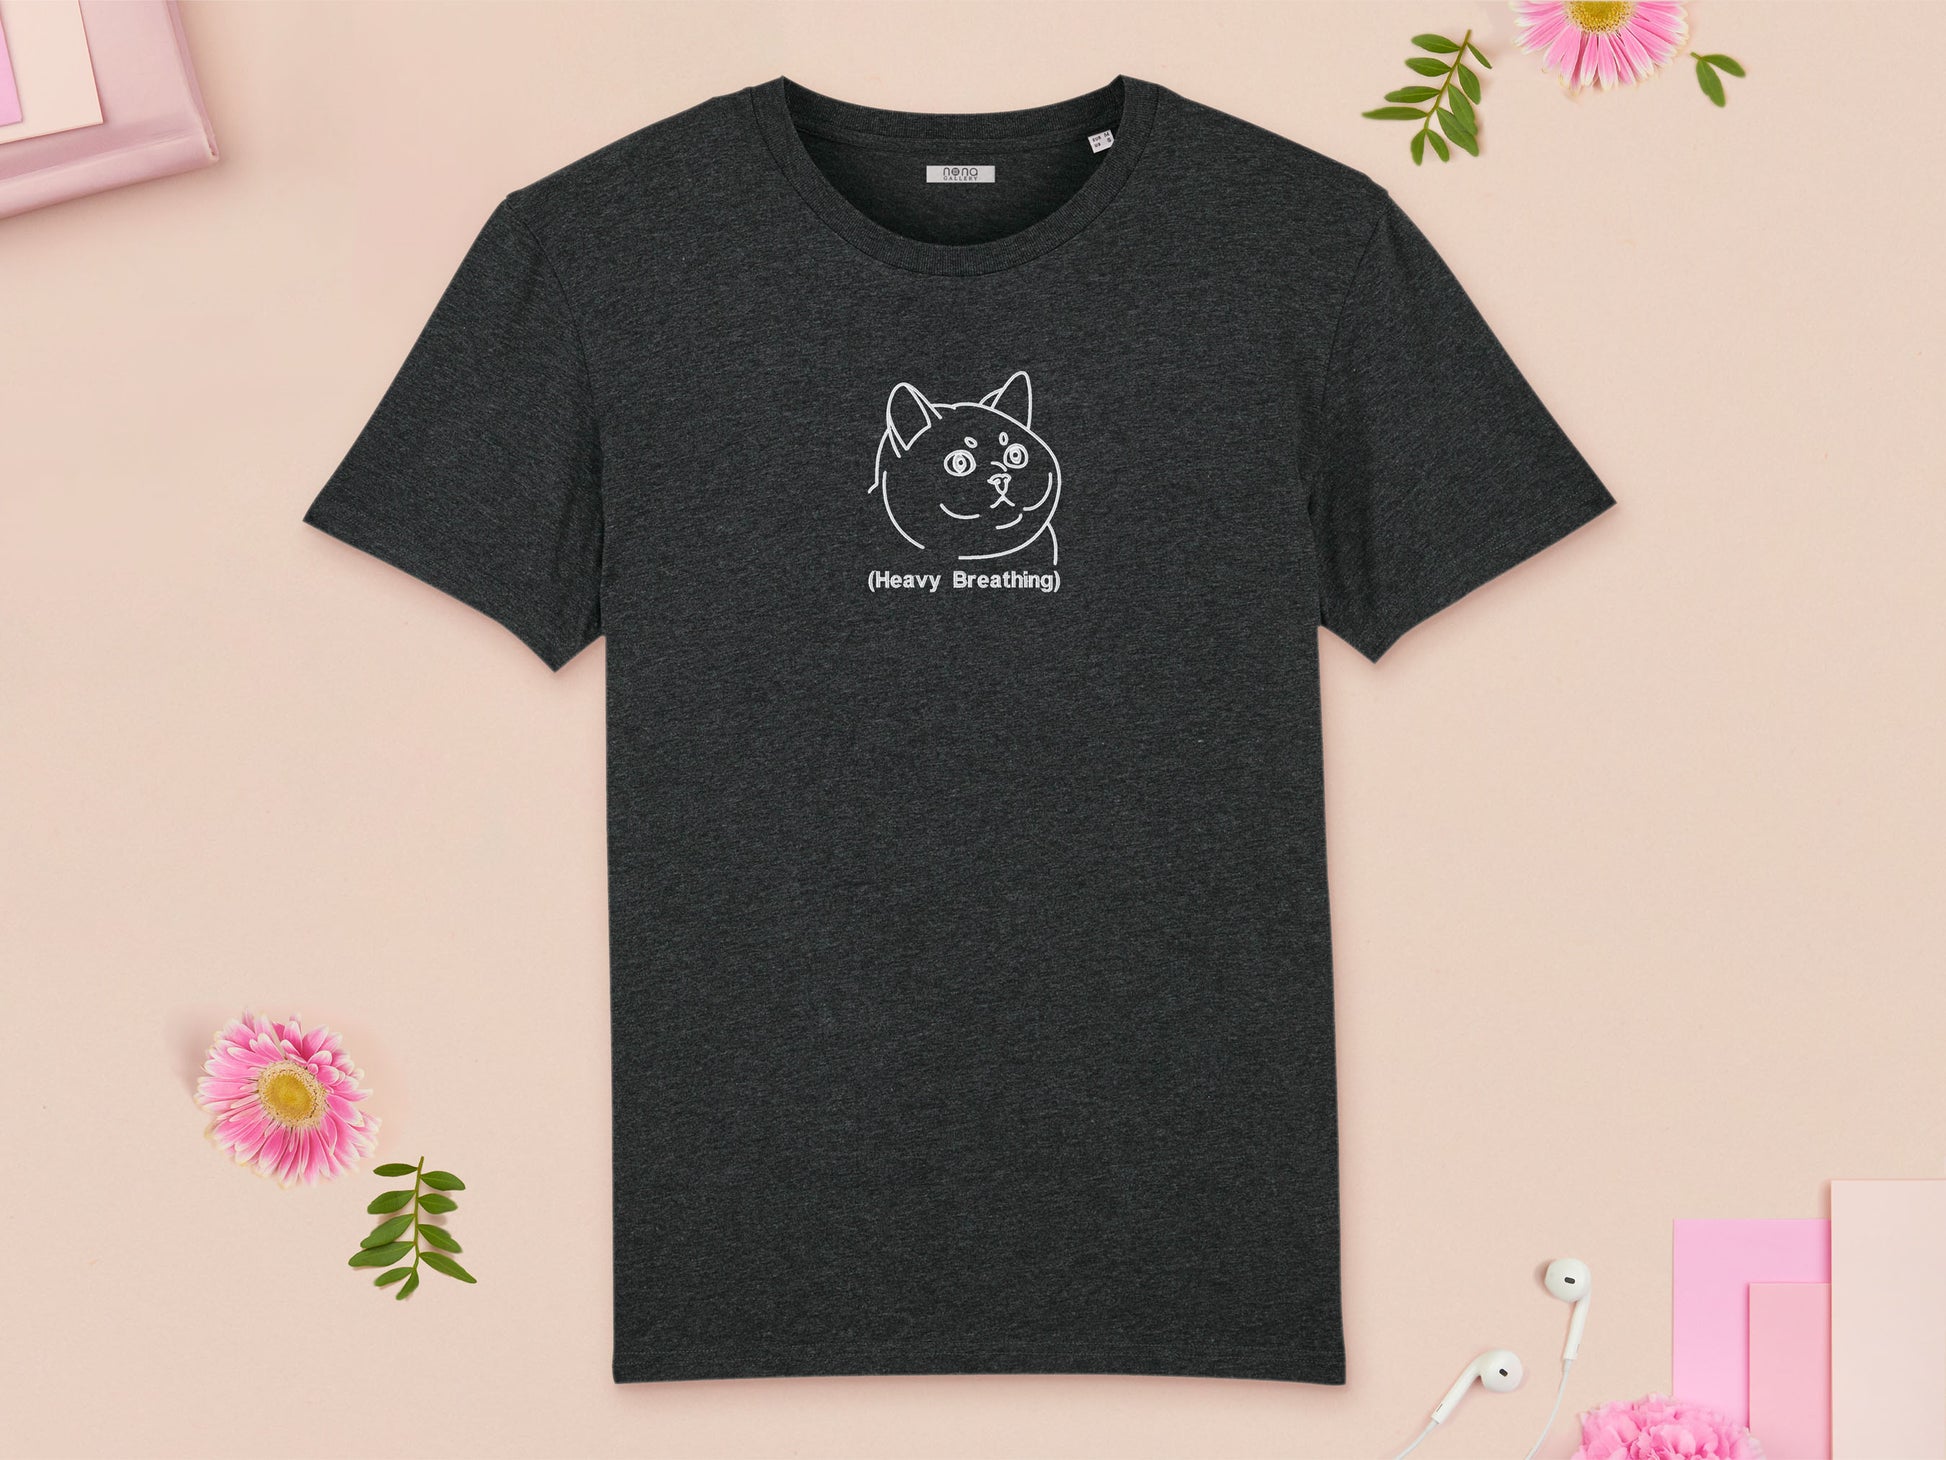 A grey crew neck short sleeve t-shirt, with an embroidered black thread design of cute fat cat portrait with text underneath saying (Heavy Breathing)